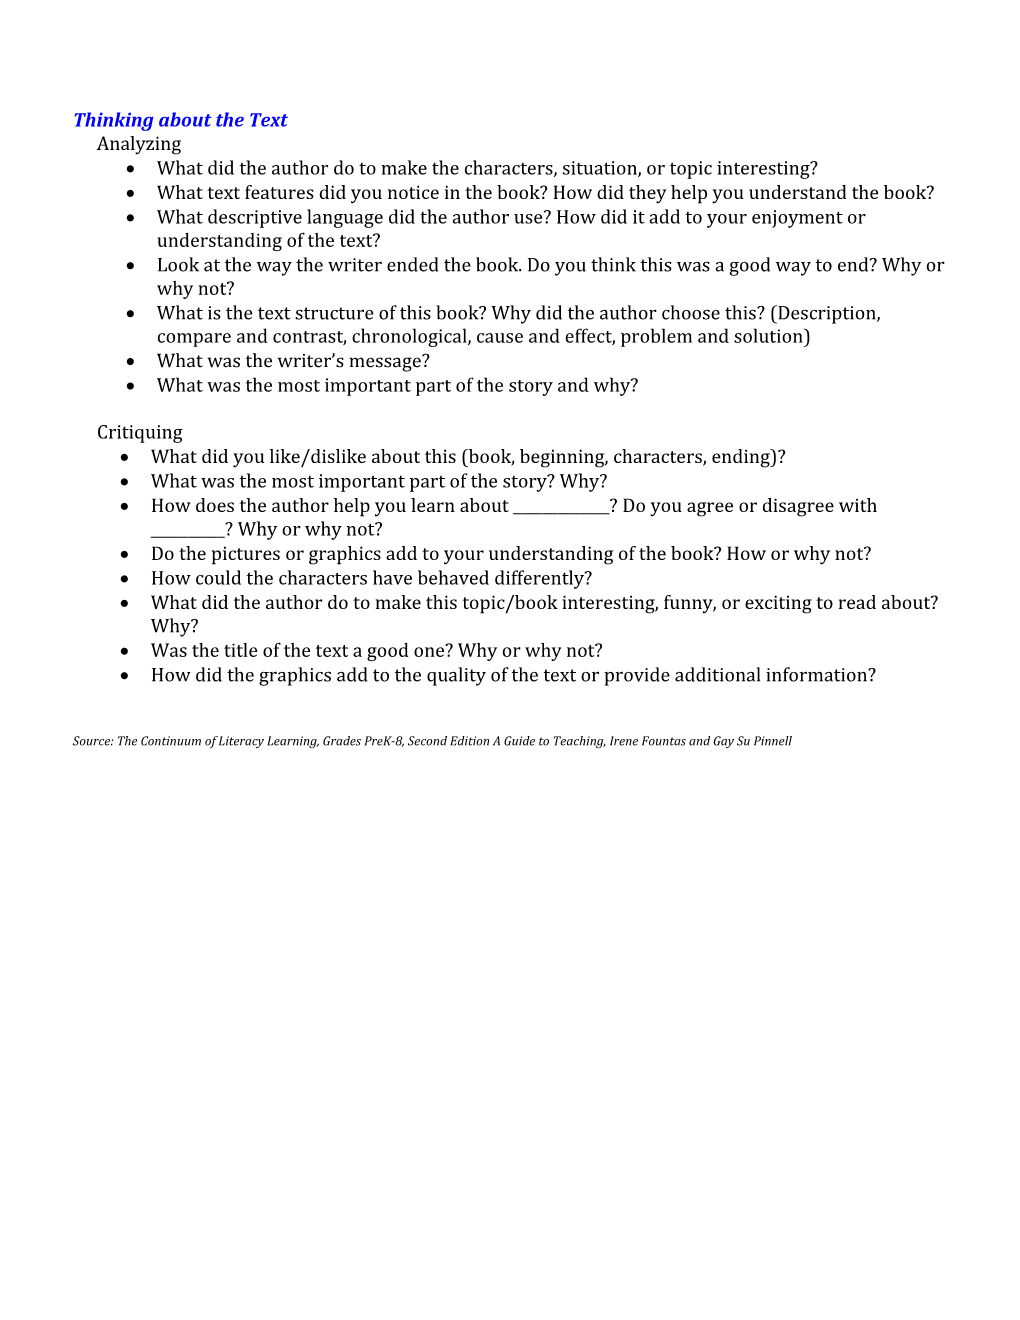 Comprehension Questions for Fourth Grade